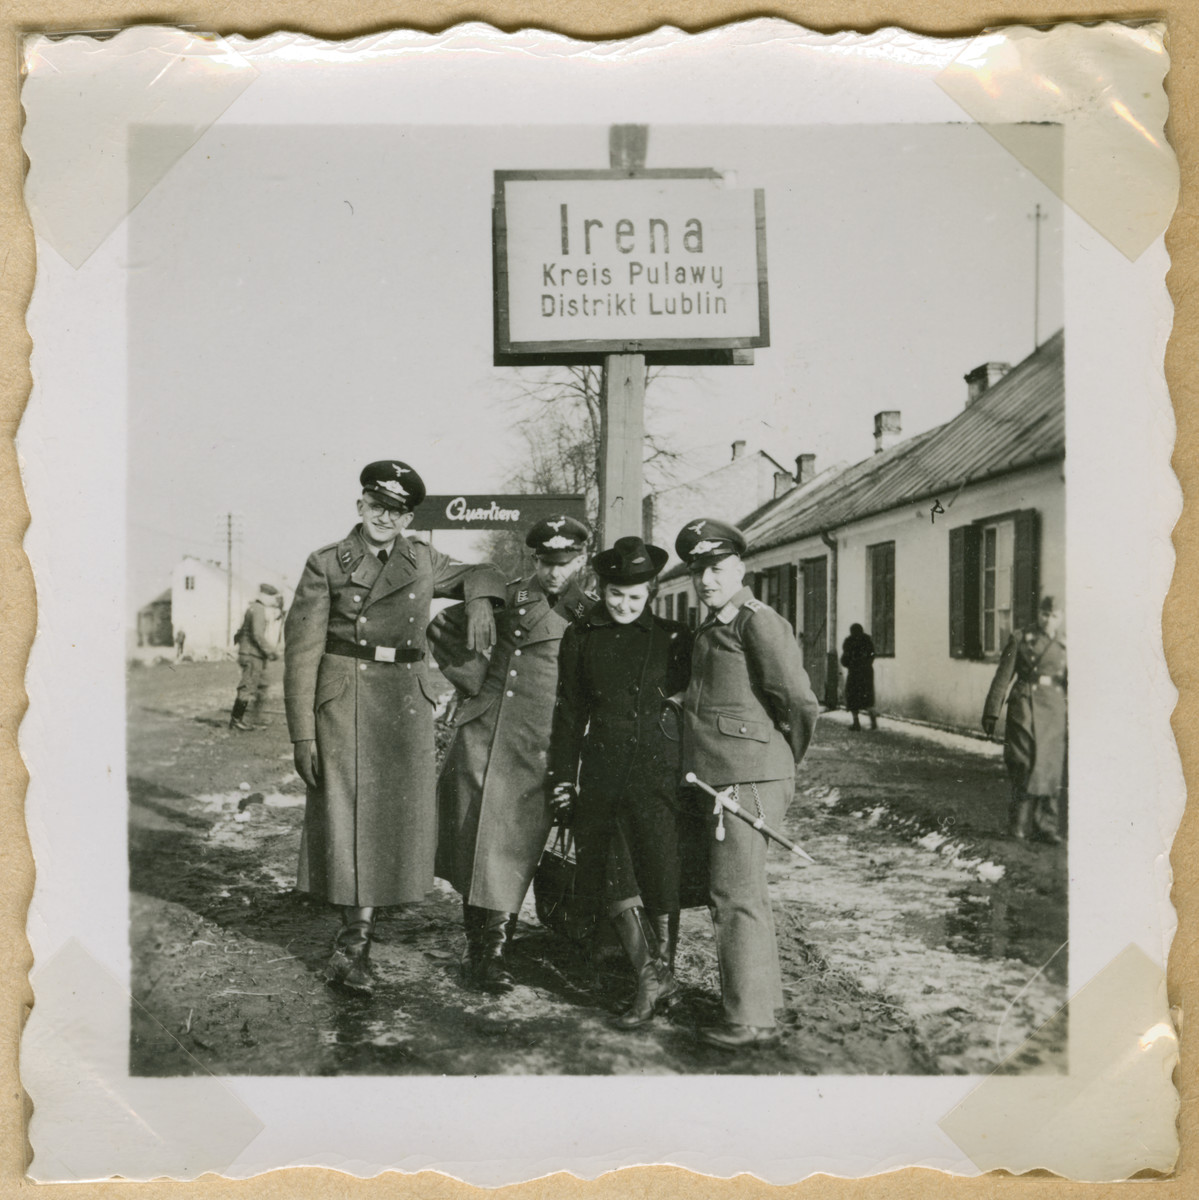 Three German soldiers and a woman pose underneath a sign to Irena/Pulawy.